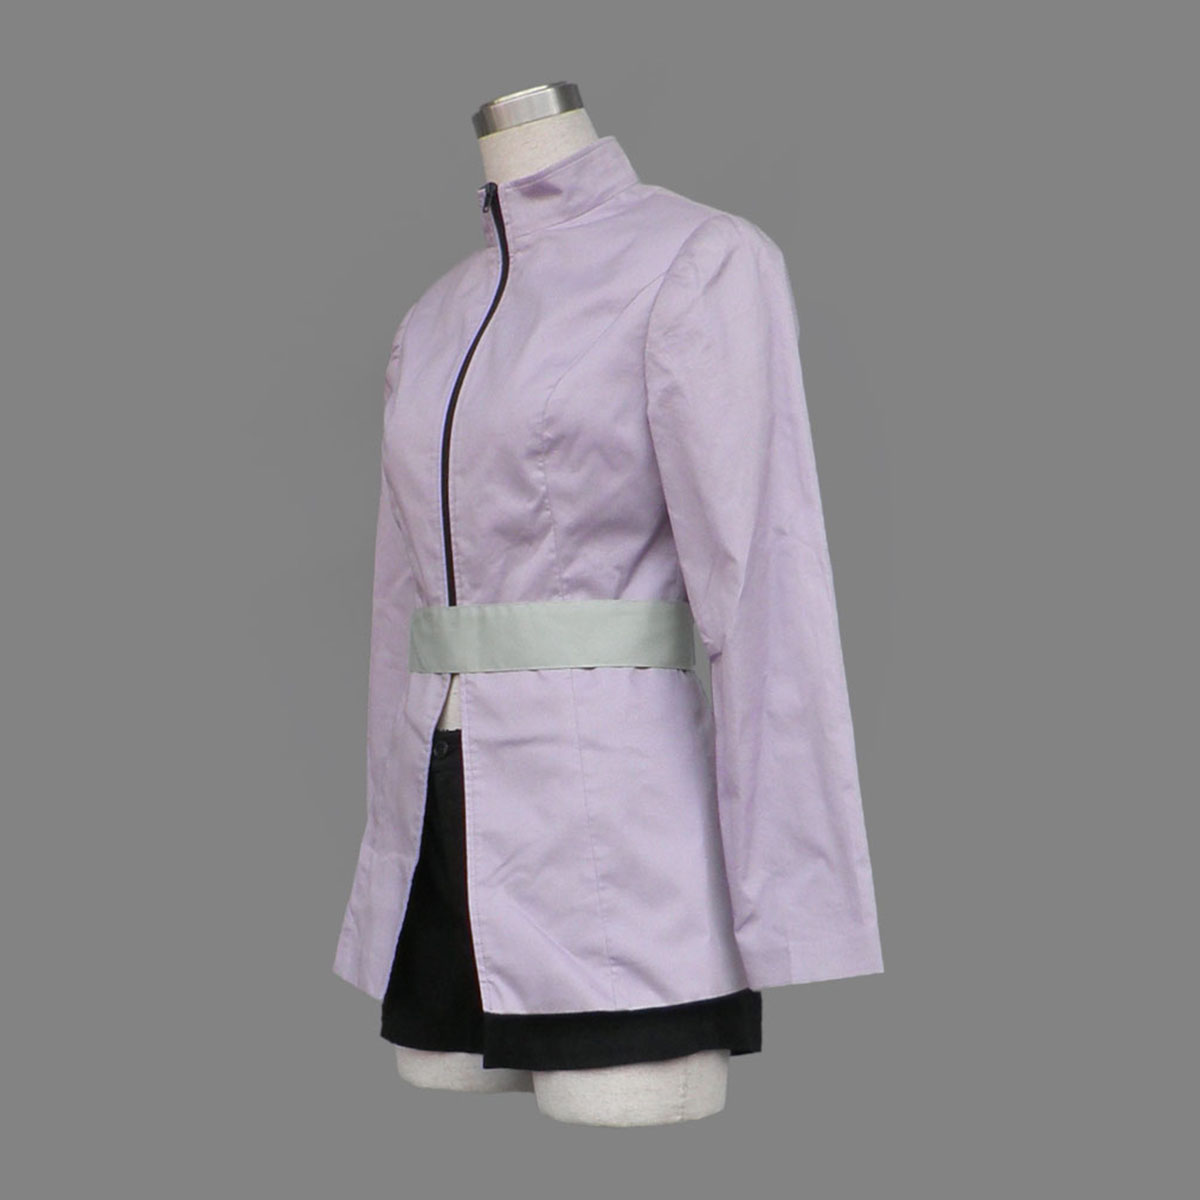 Naruto Karin 1 Anime Cosplay Costumes Outfit